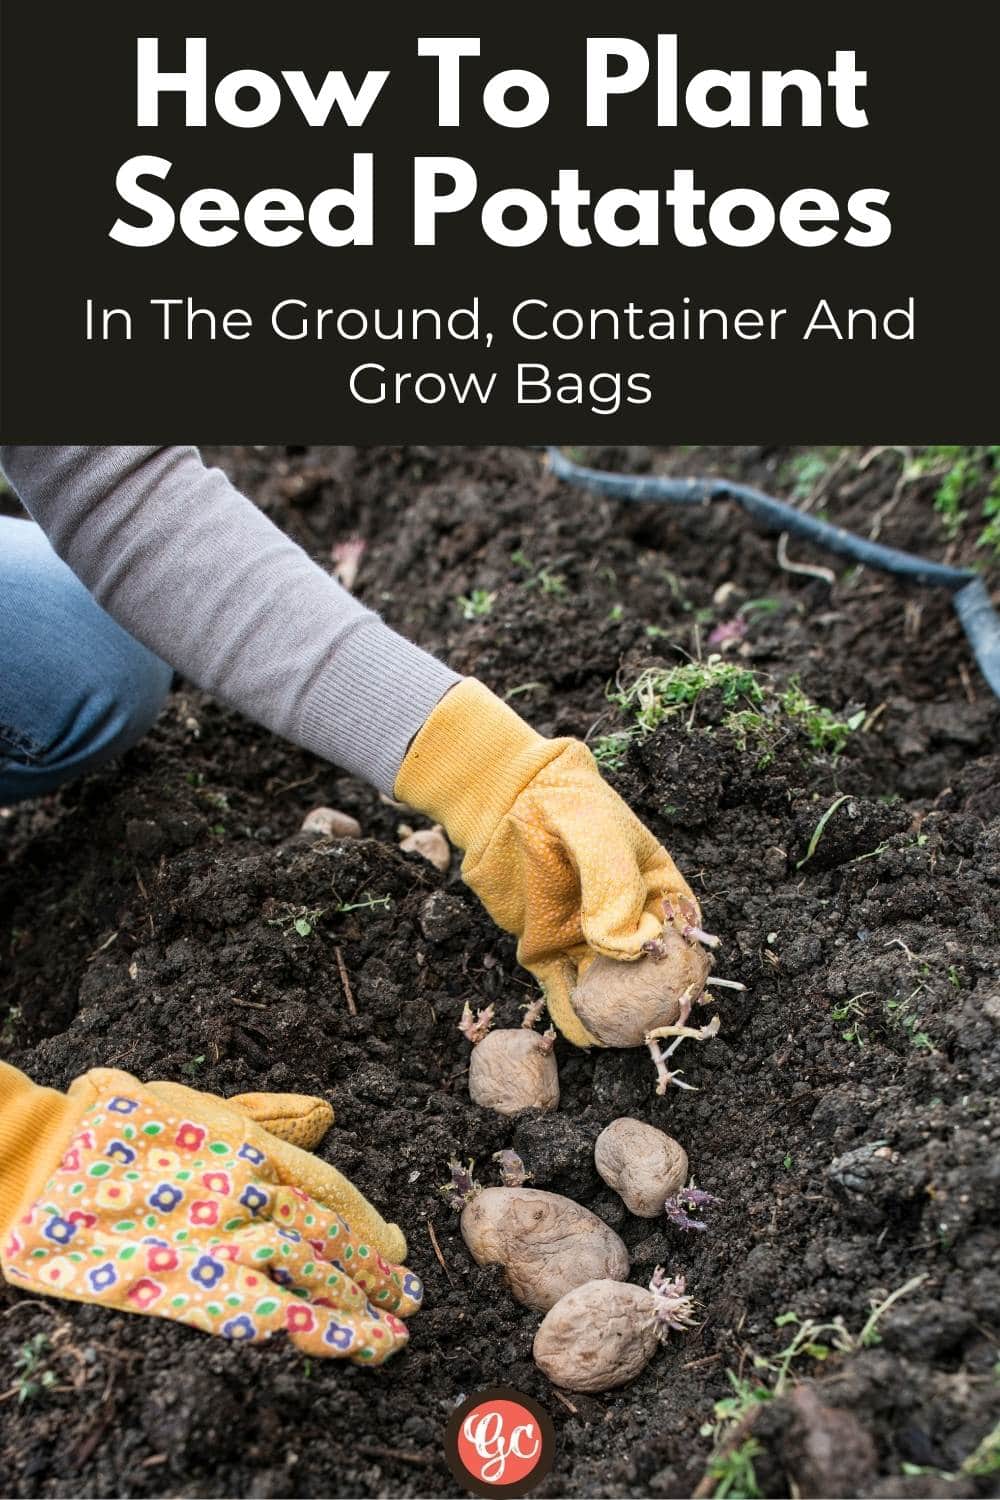 How To Plant And Grow Seed Potatoes In The Ground and Containers